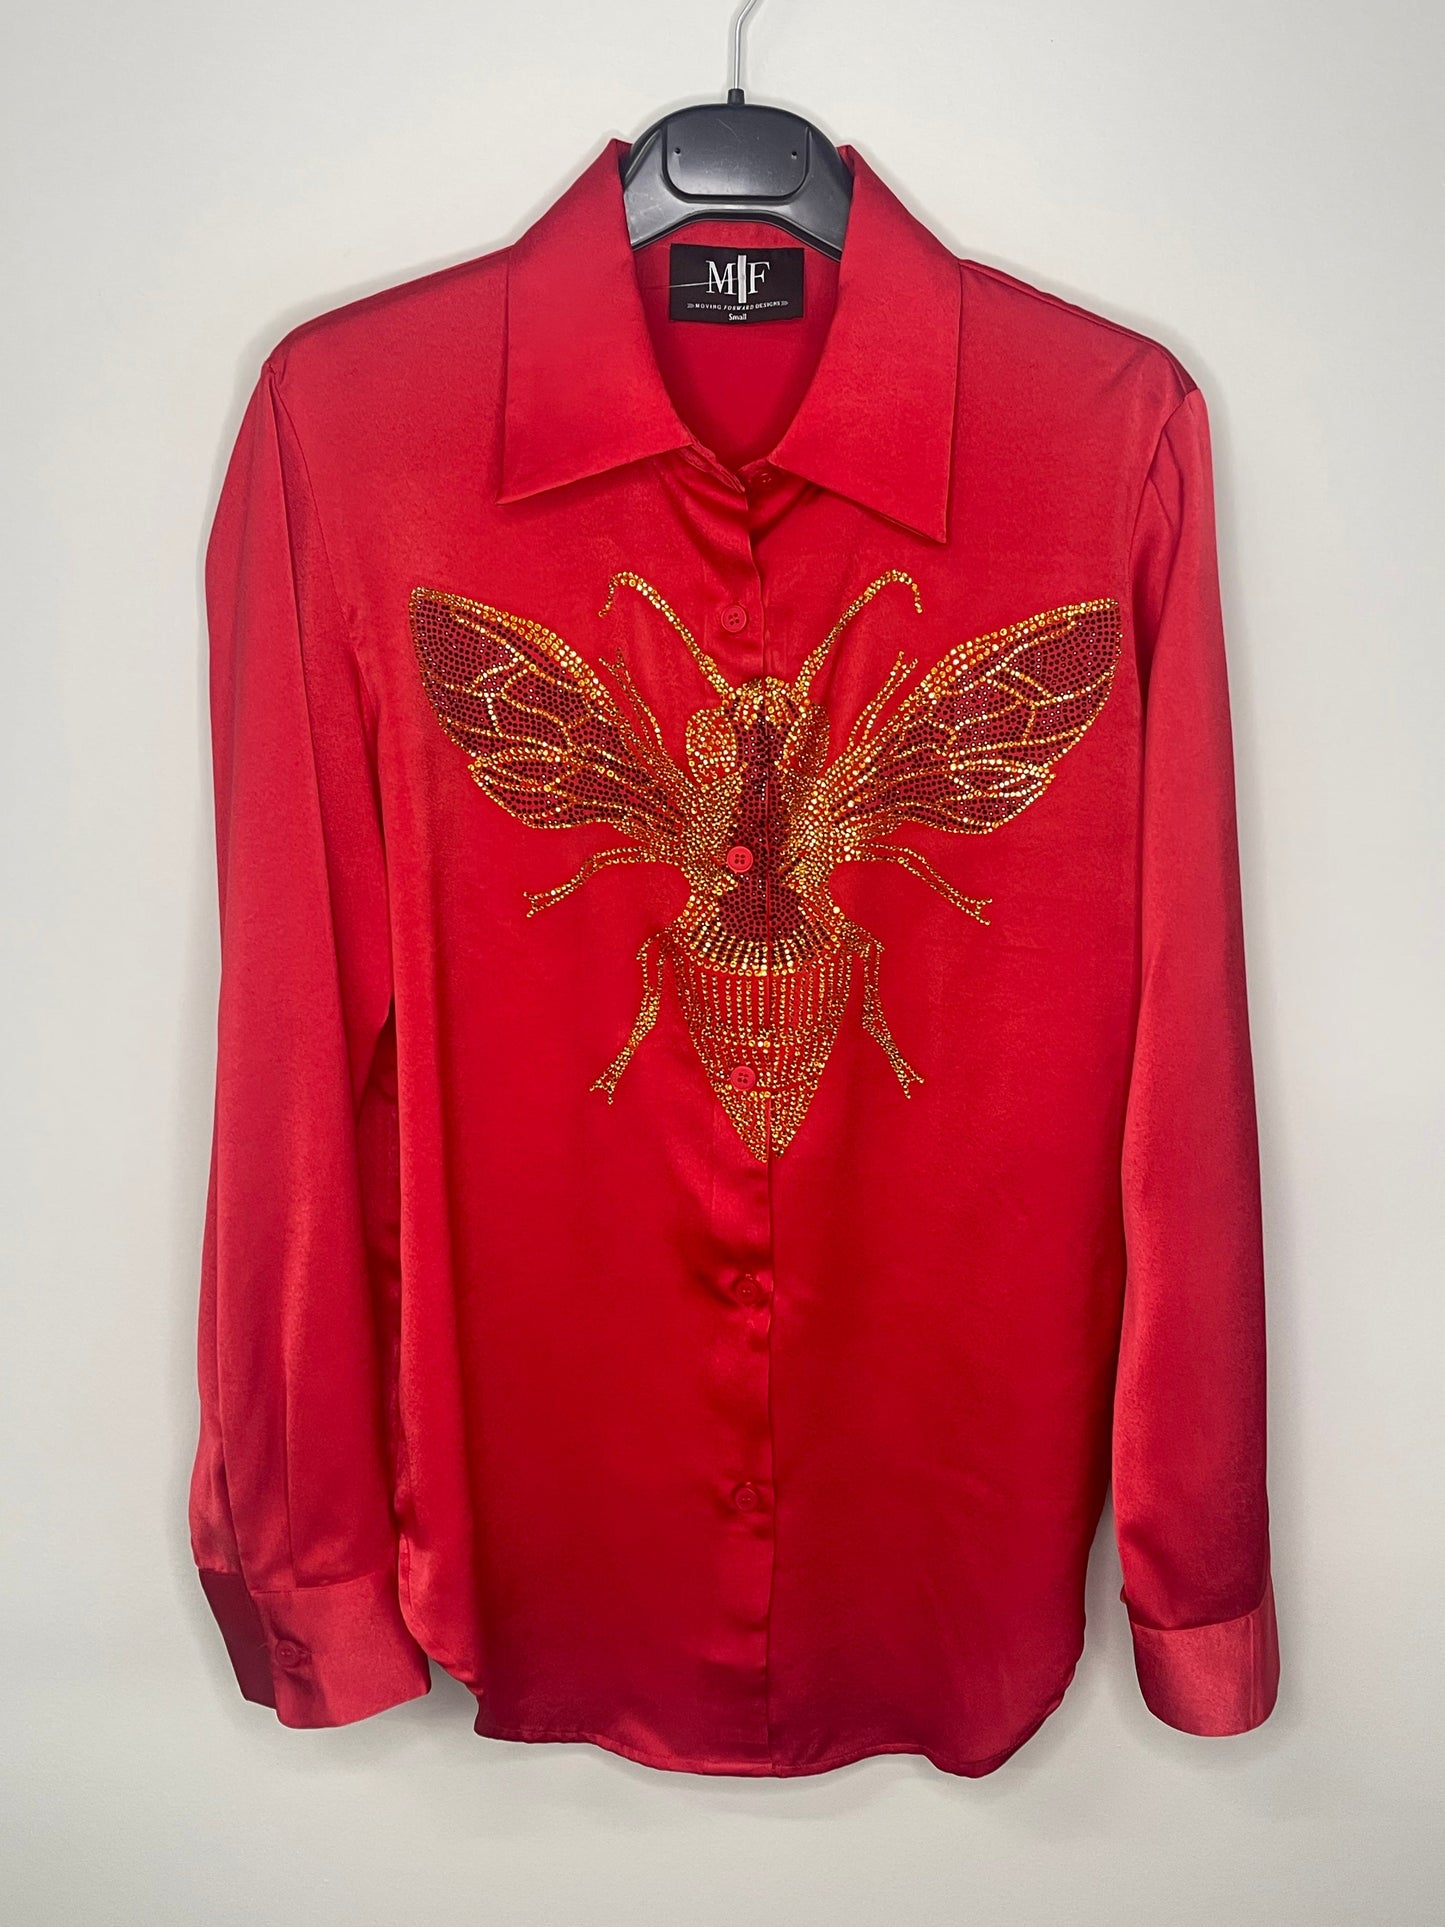 Shirt, Silky Red, Gold Queen Bee on Front